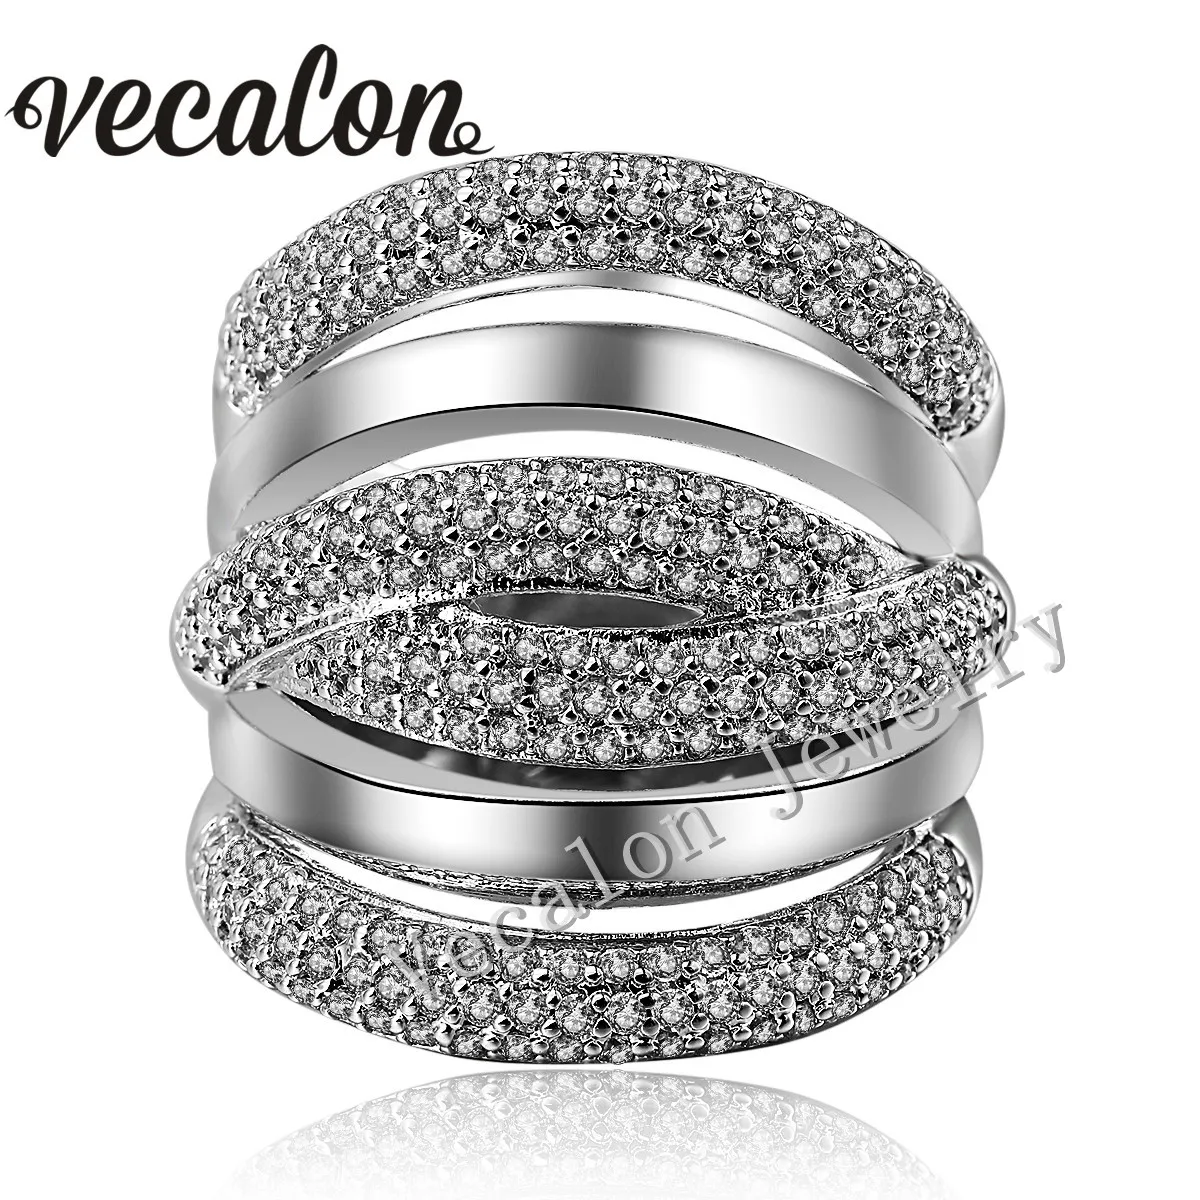 Vecalon pave set 234pcs Topaz Simulated diamond Cz Cross Engagement Wedding ring for Women 14KT White Gold Filled Female Band ring